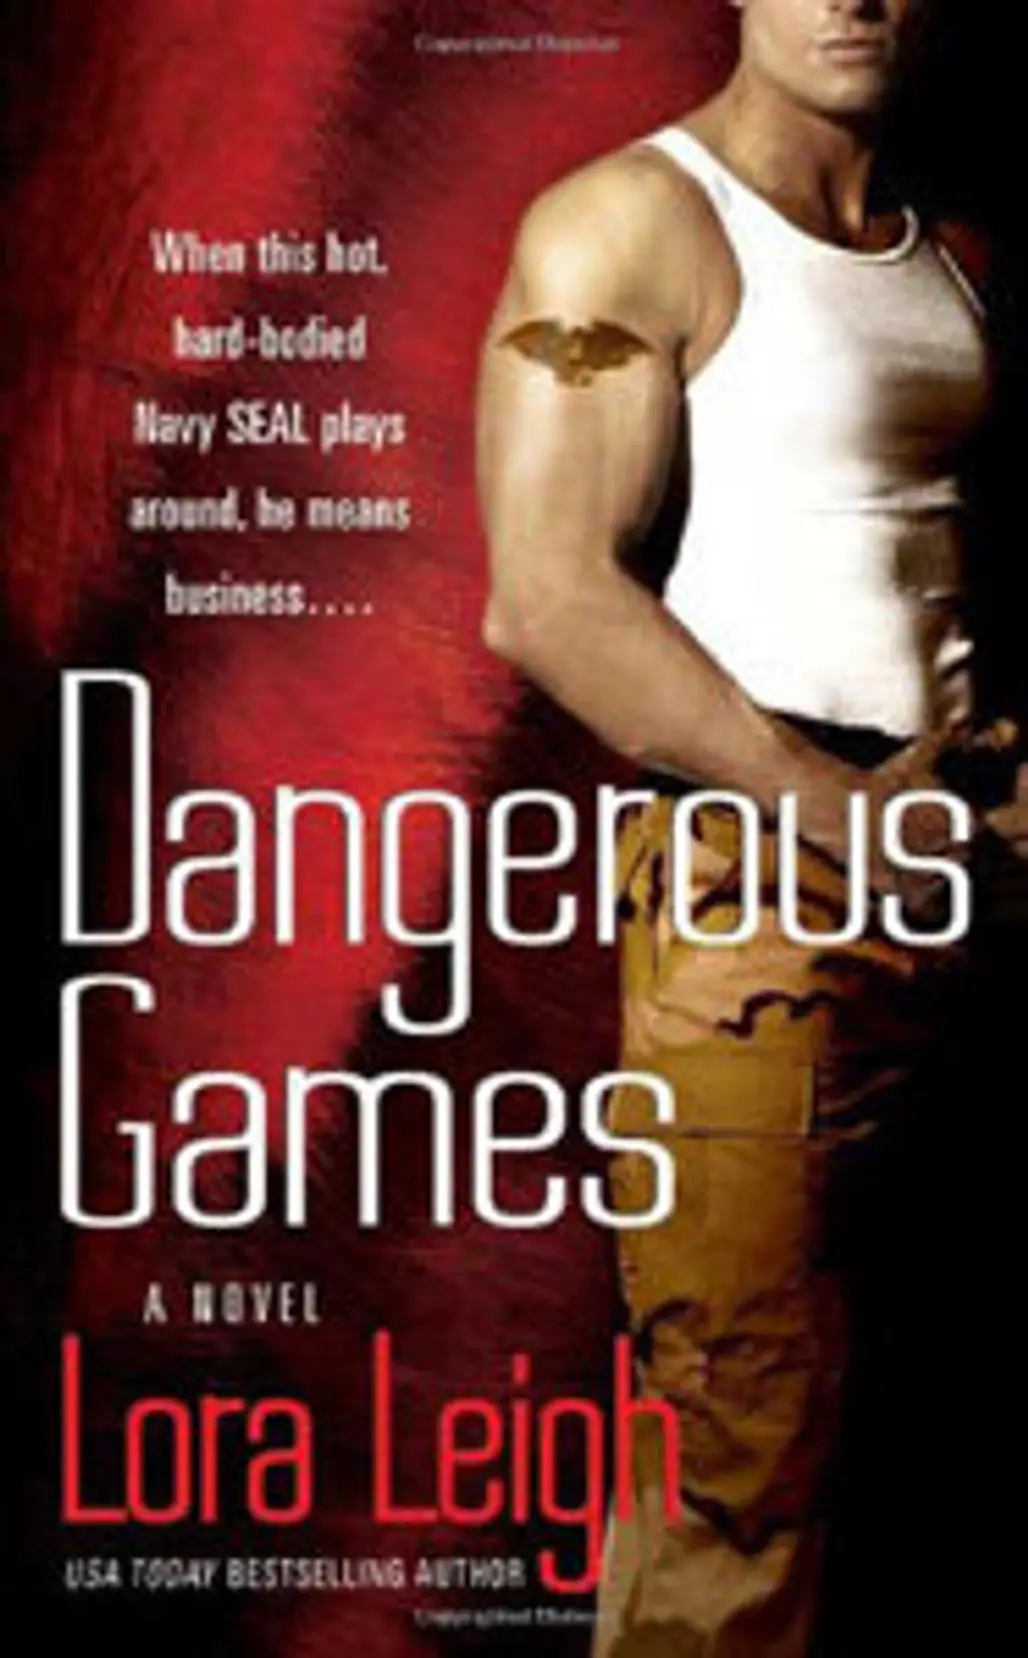 Dangerous Games by Lora Leigh